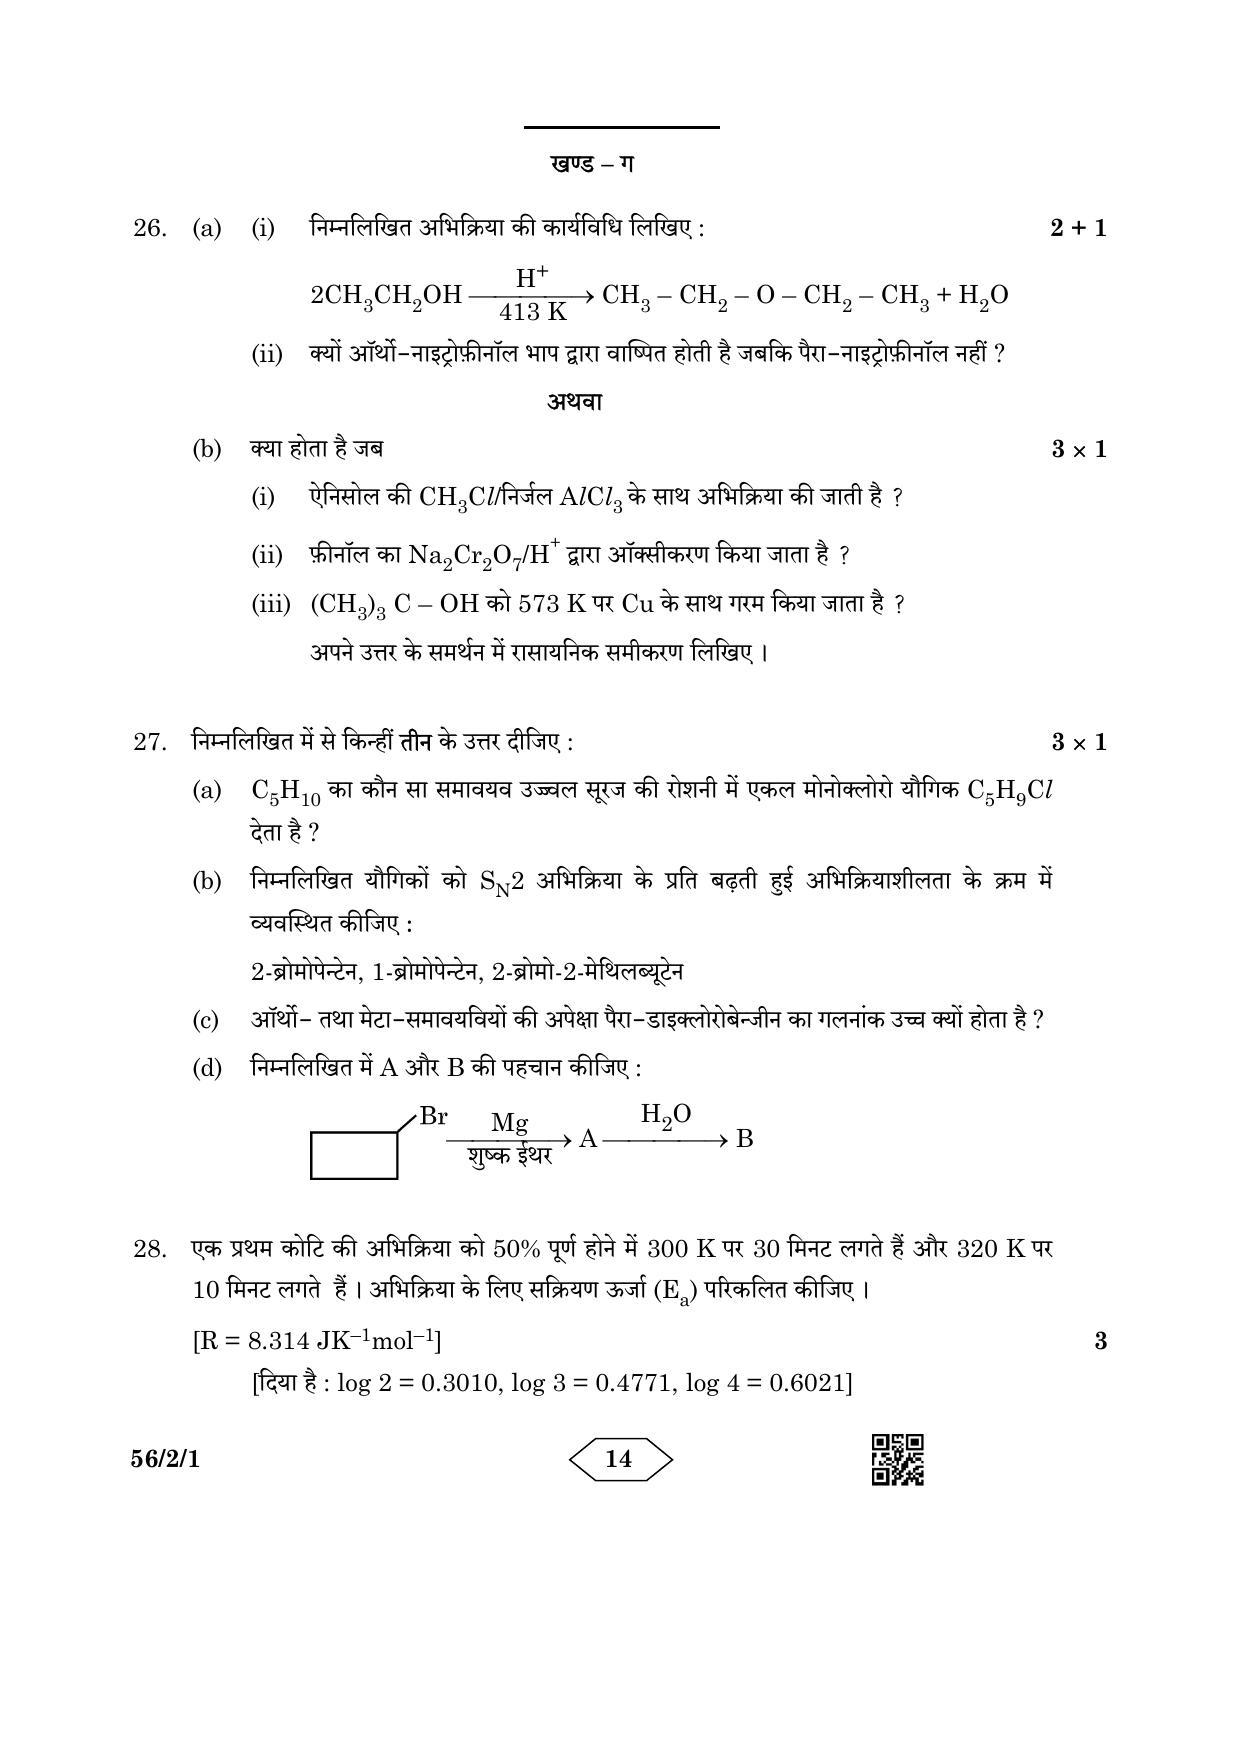 CBSE Class 12 56-2-1 Chemistry 2023 Question Paper - Page 14